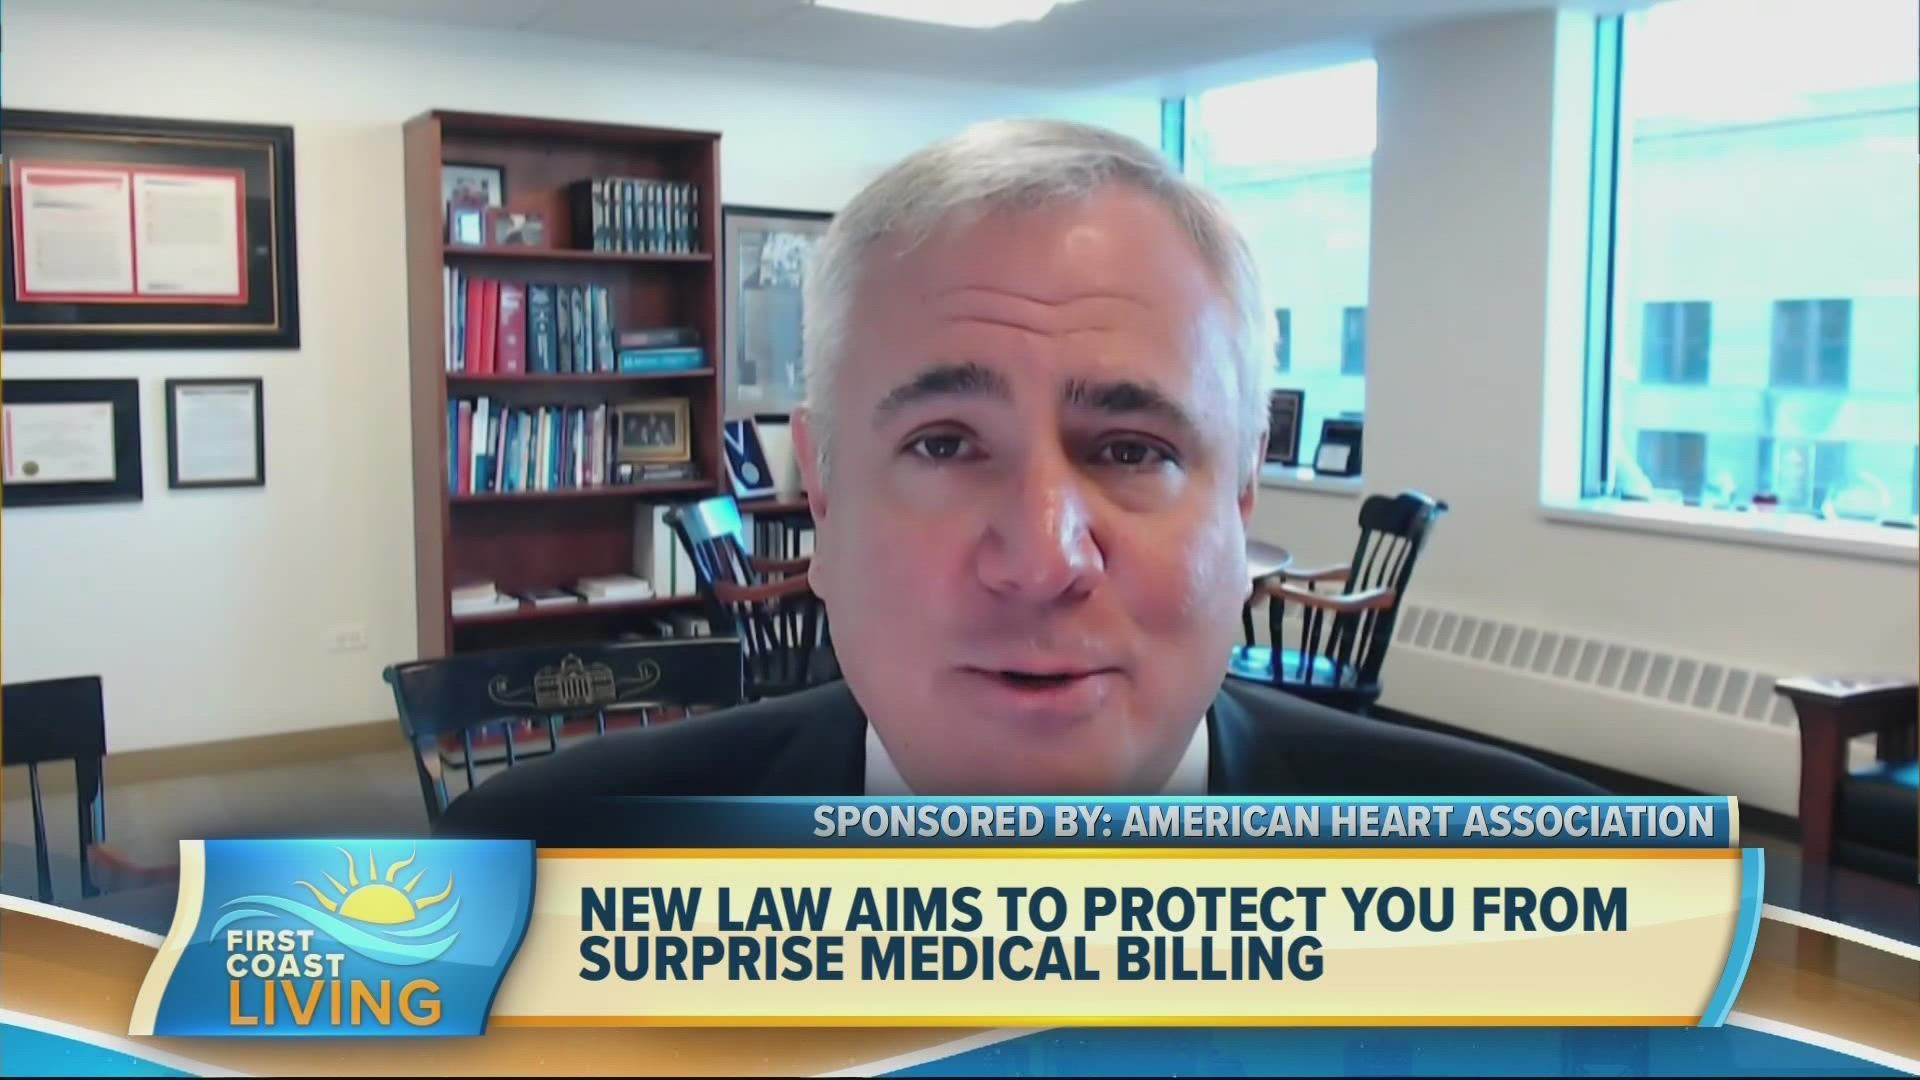 President of the American Heart Association, Dr. Donald Lloyd-Jones explains how the 'No Surprises Act' will help shield families from surprise medical bills.